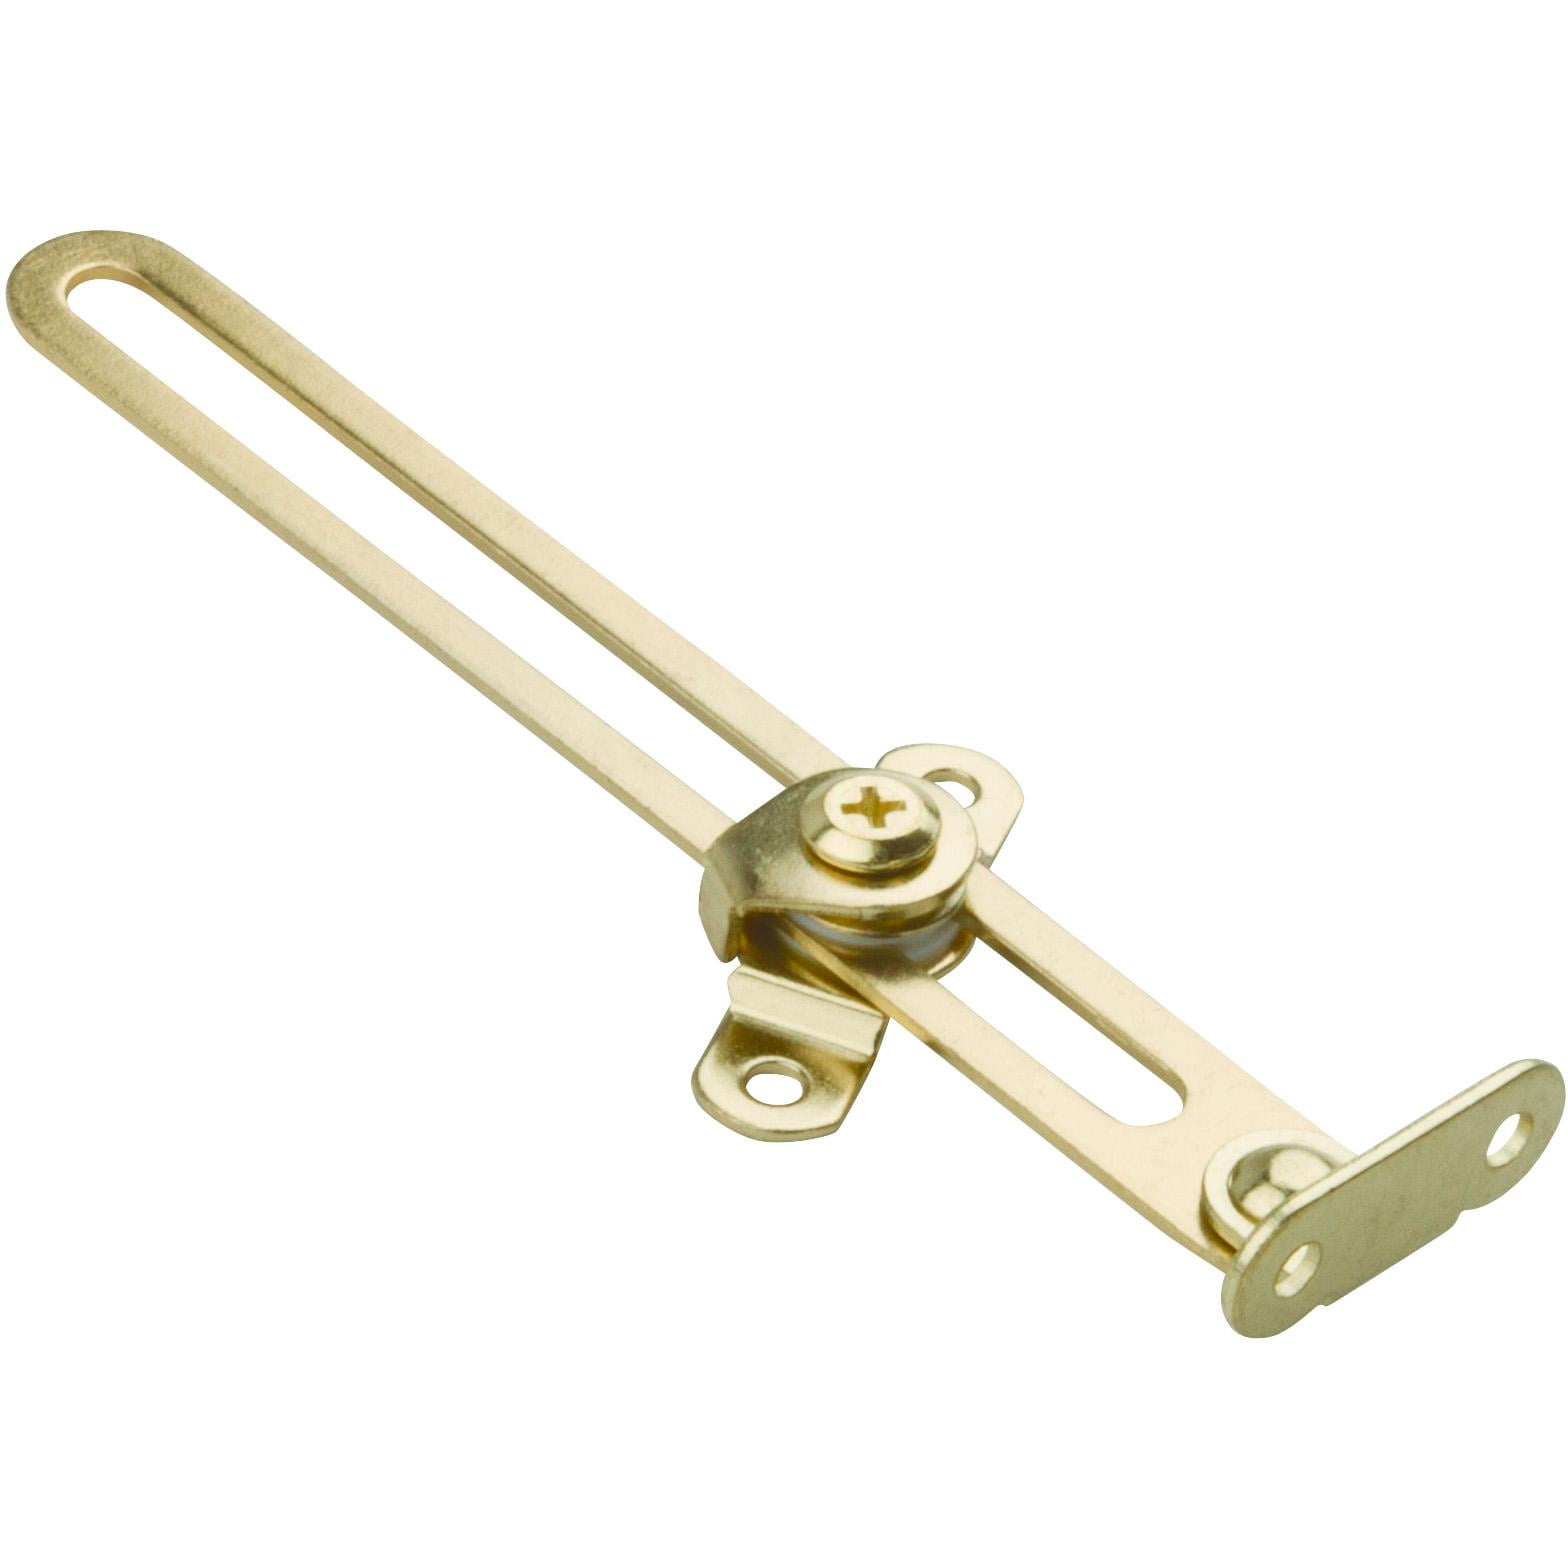 5700901 0.65 X 5.75 In. Friction Lid Support - Polished Brass